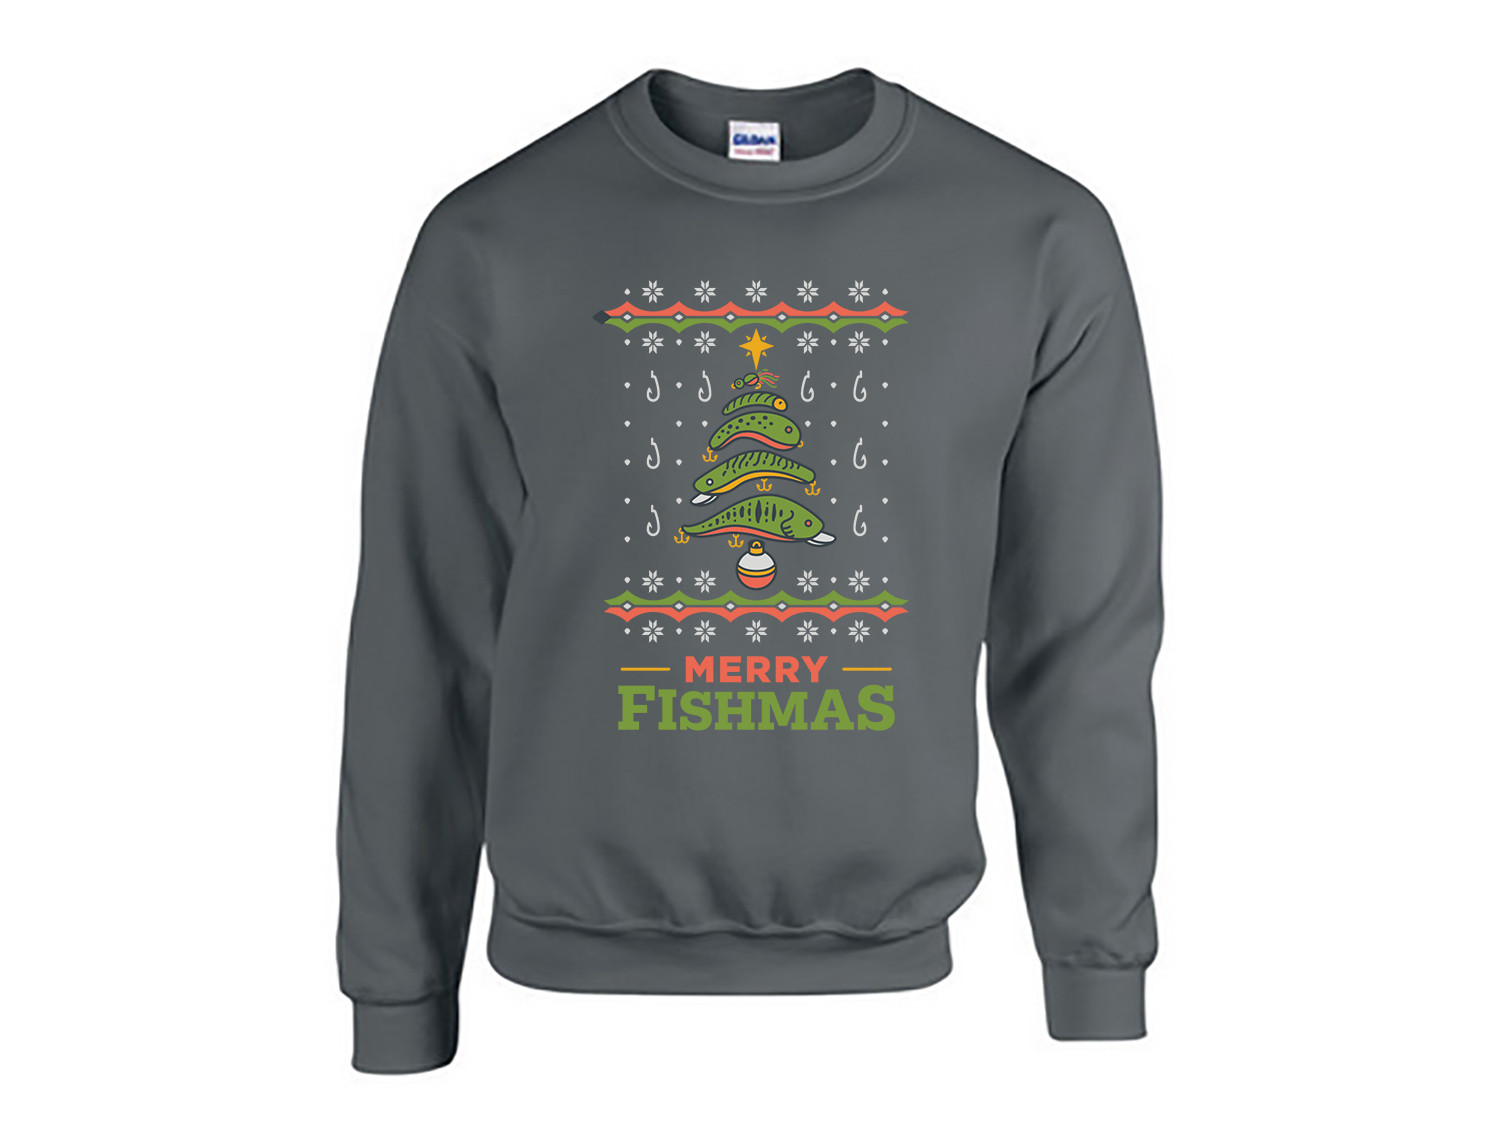 Fishing Ugly Christmas Sweater, For Men & Women, Adult, Us4993